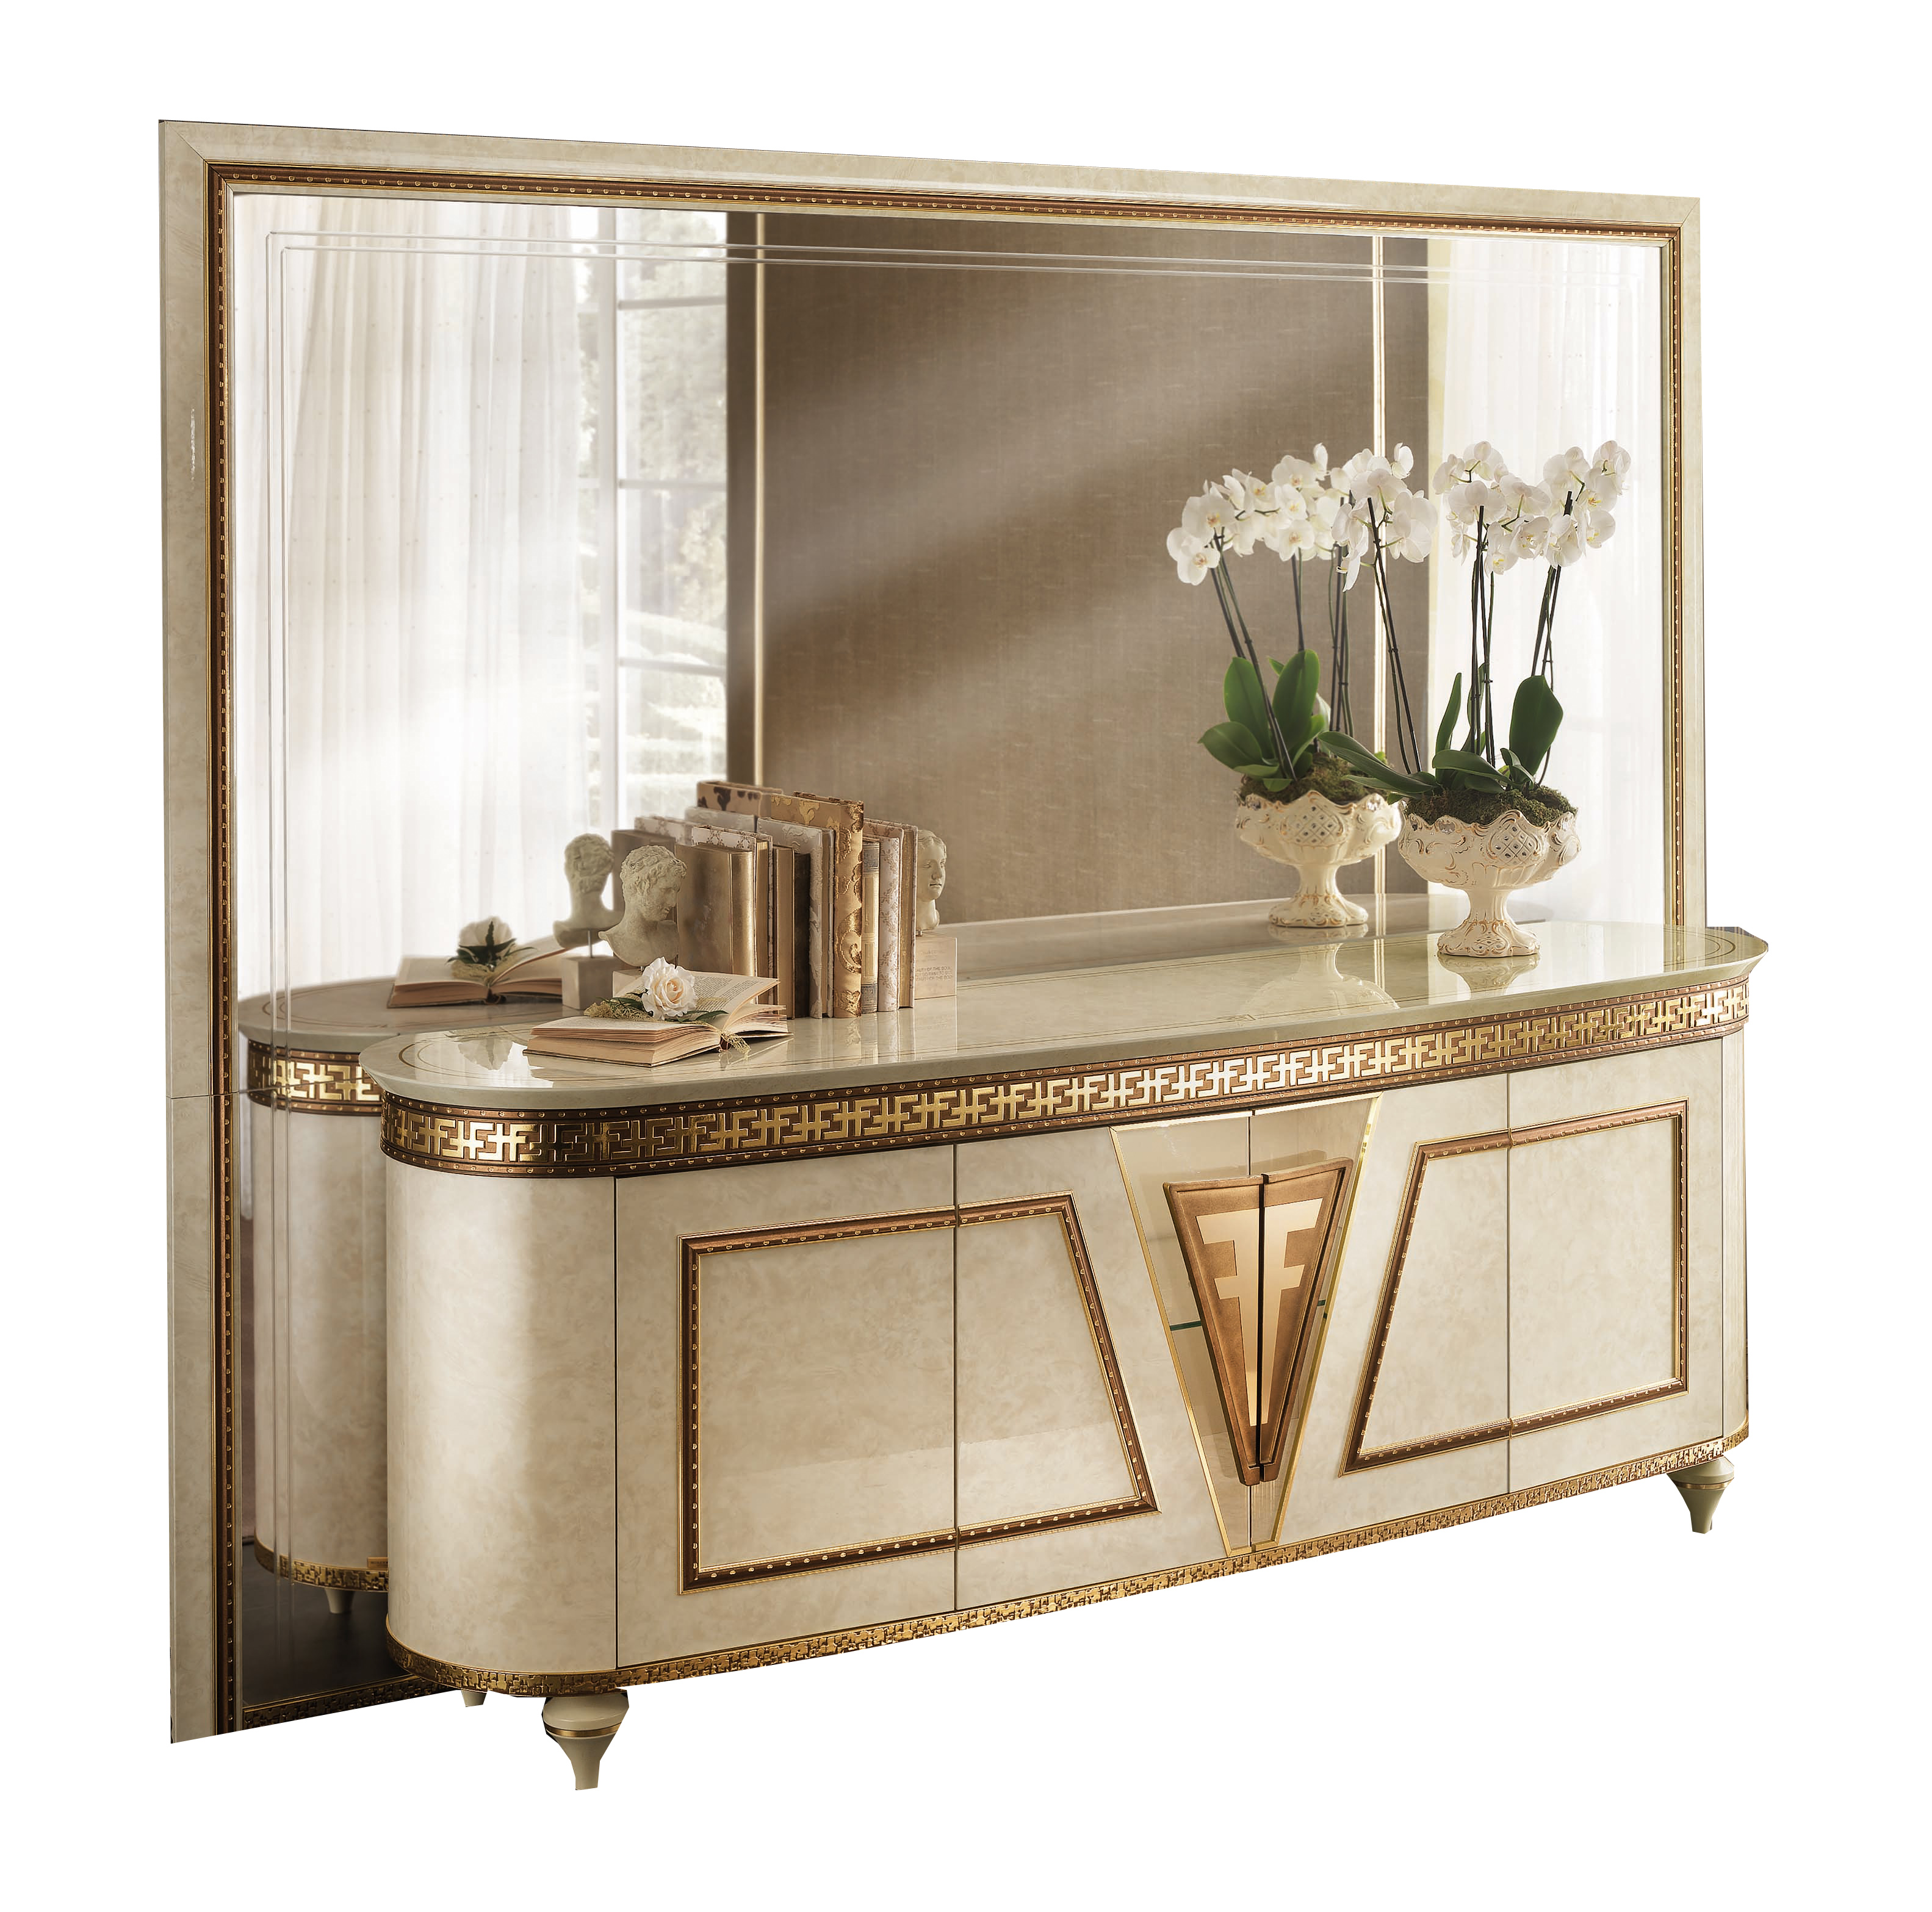 Brands Arredoclassic Dining Room, Italy Fantasia 4-Door Buffet & Large Mirror "mural" Art. 250by Arredoclassic